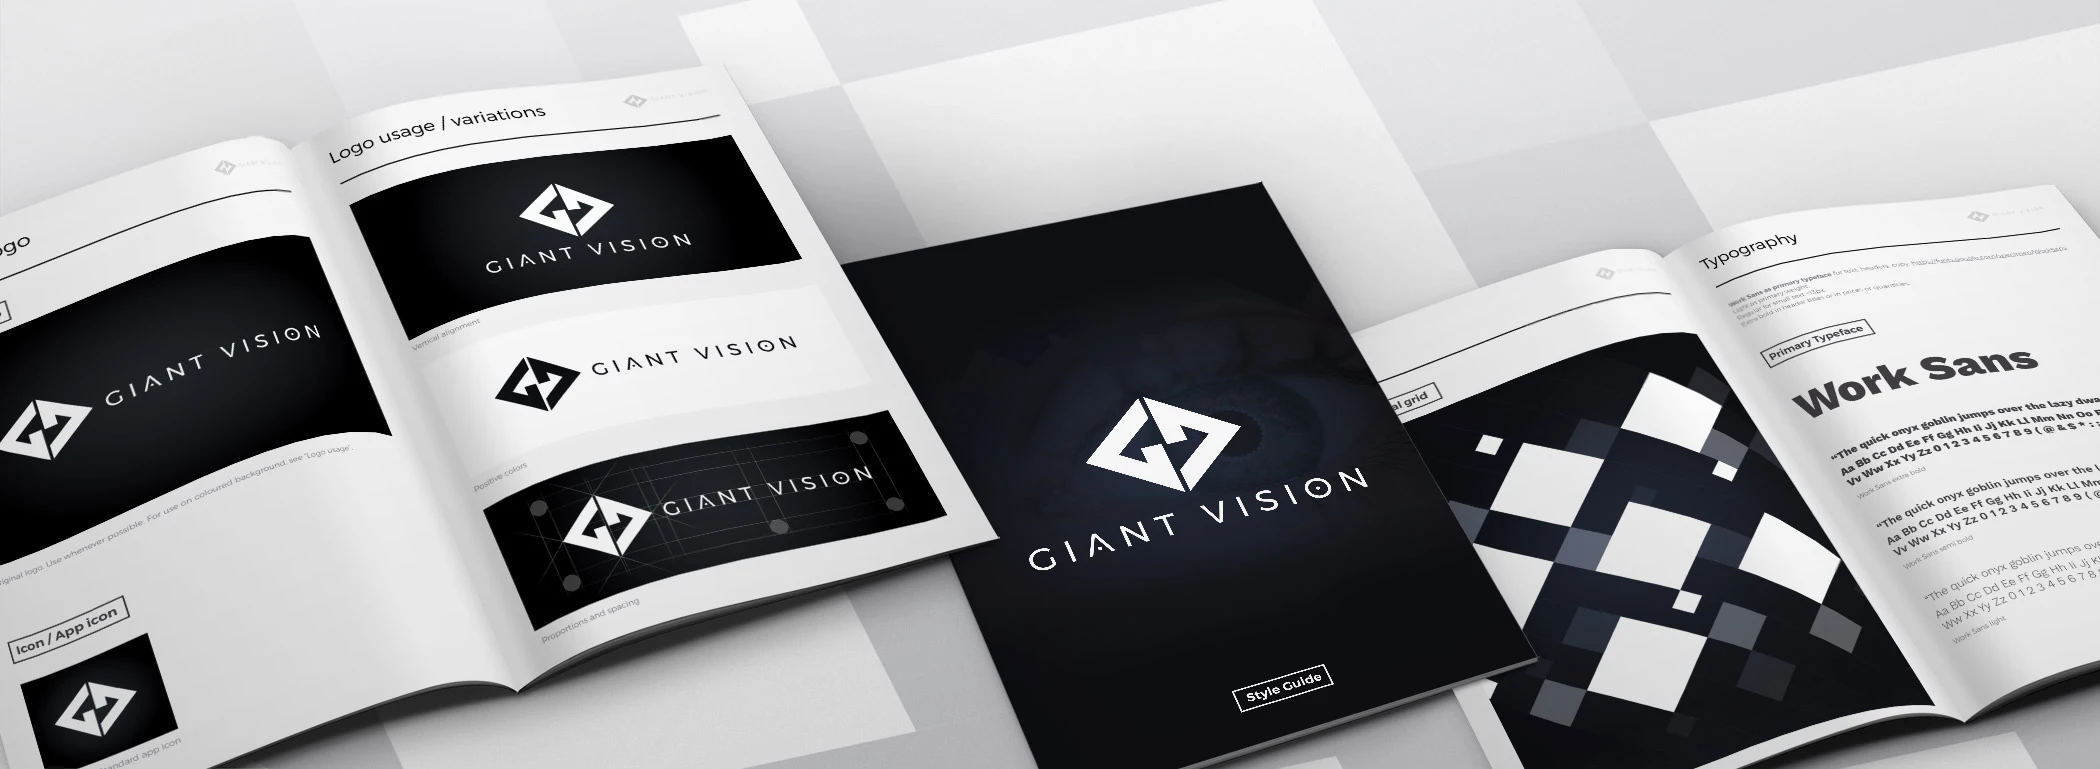 Giant Vision - Brand style guide